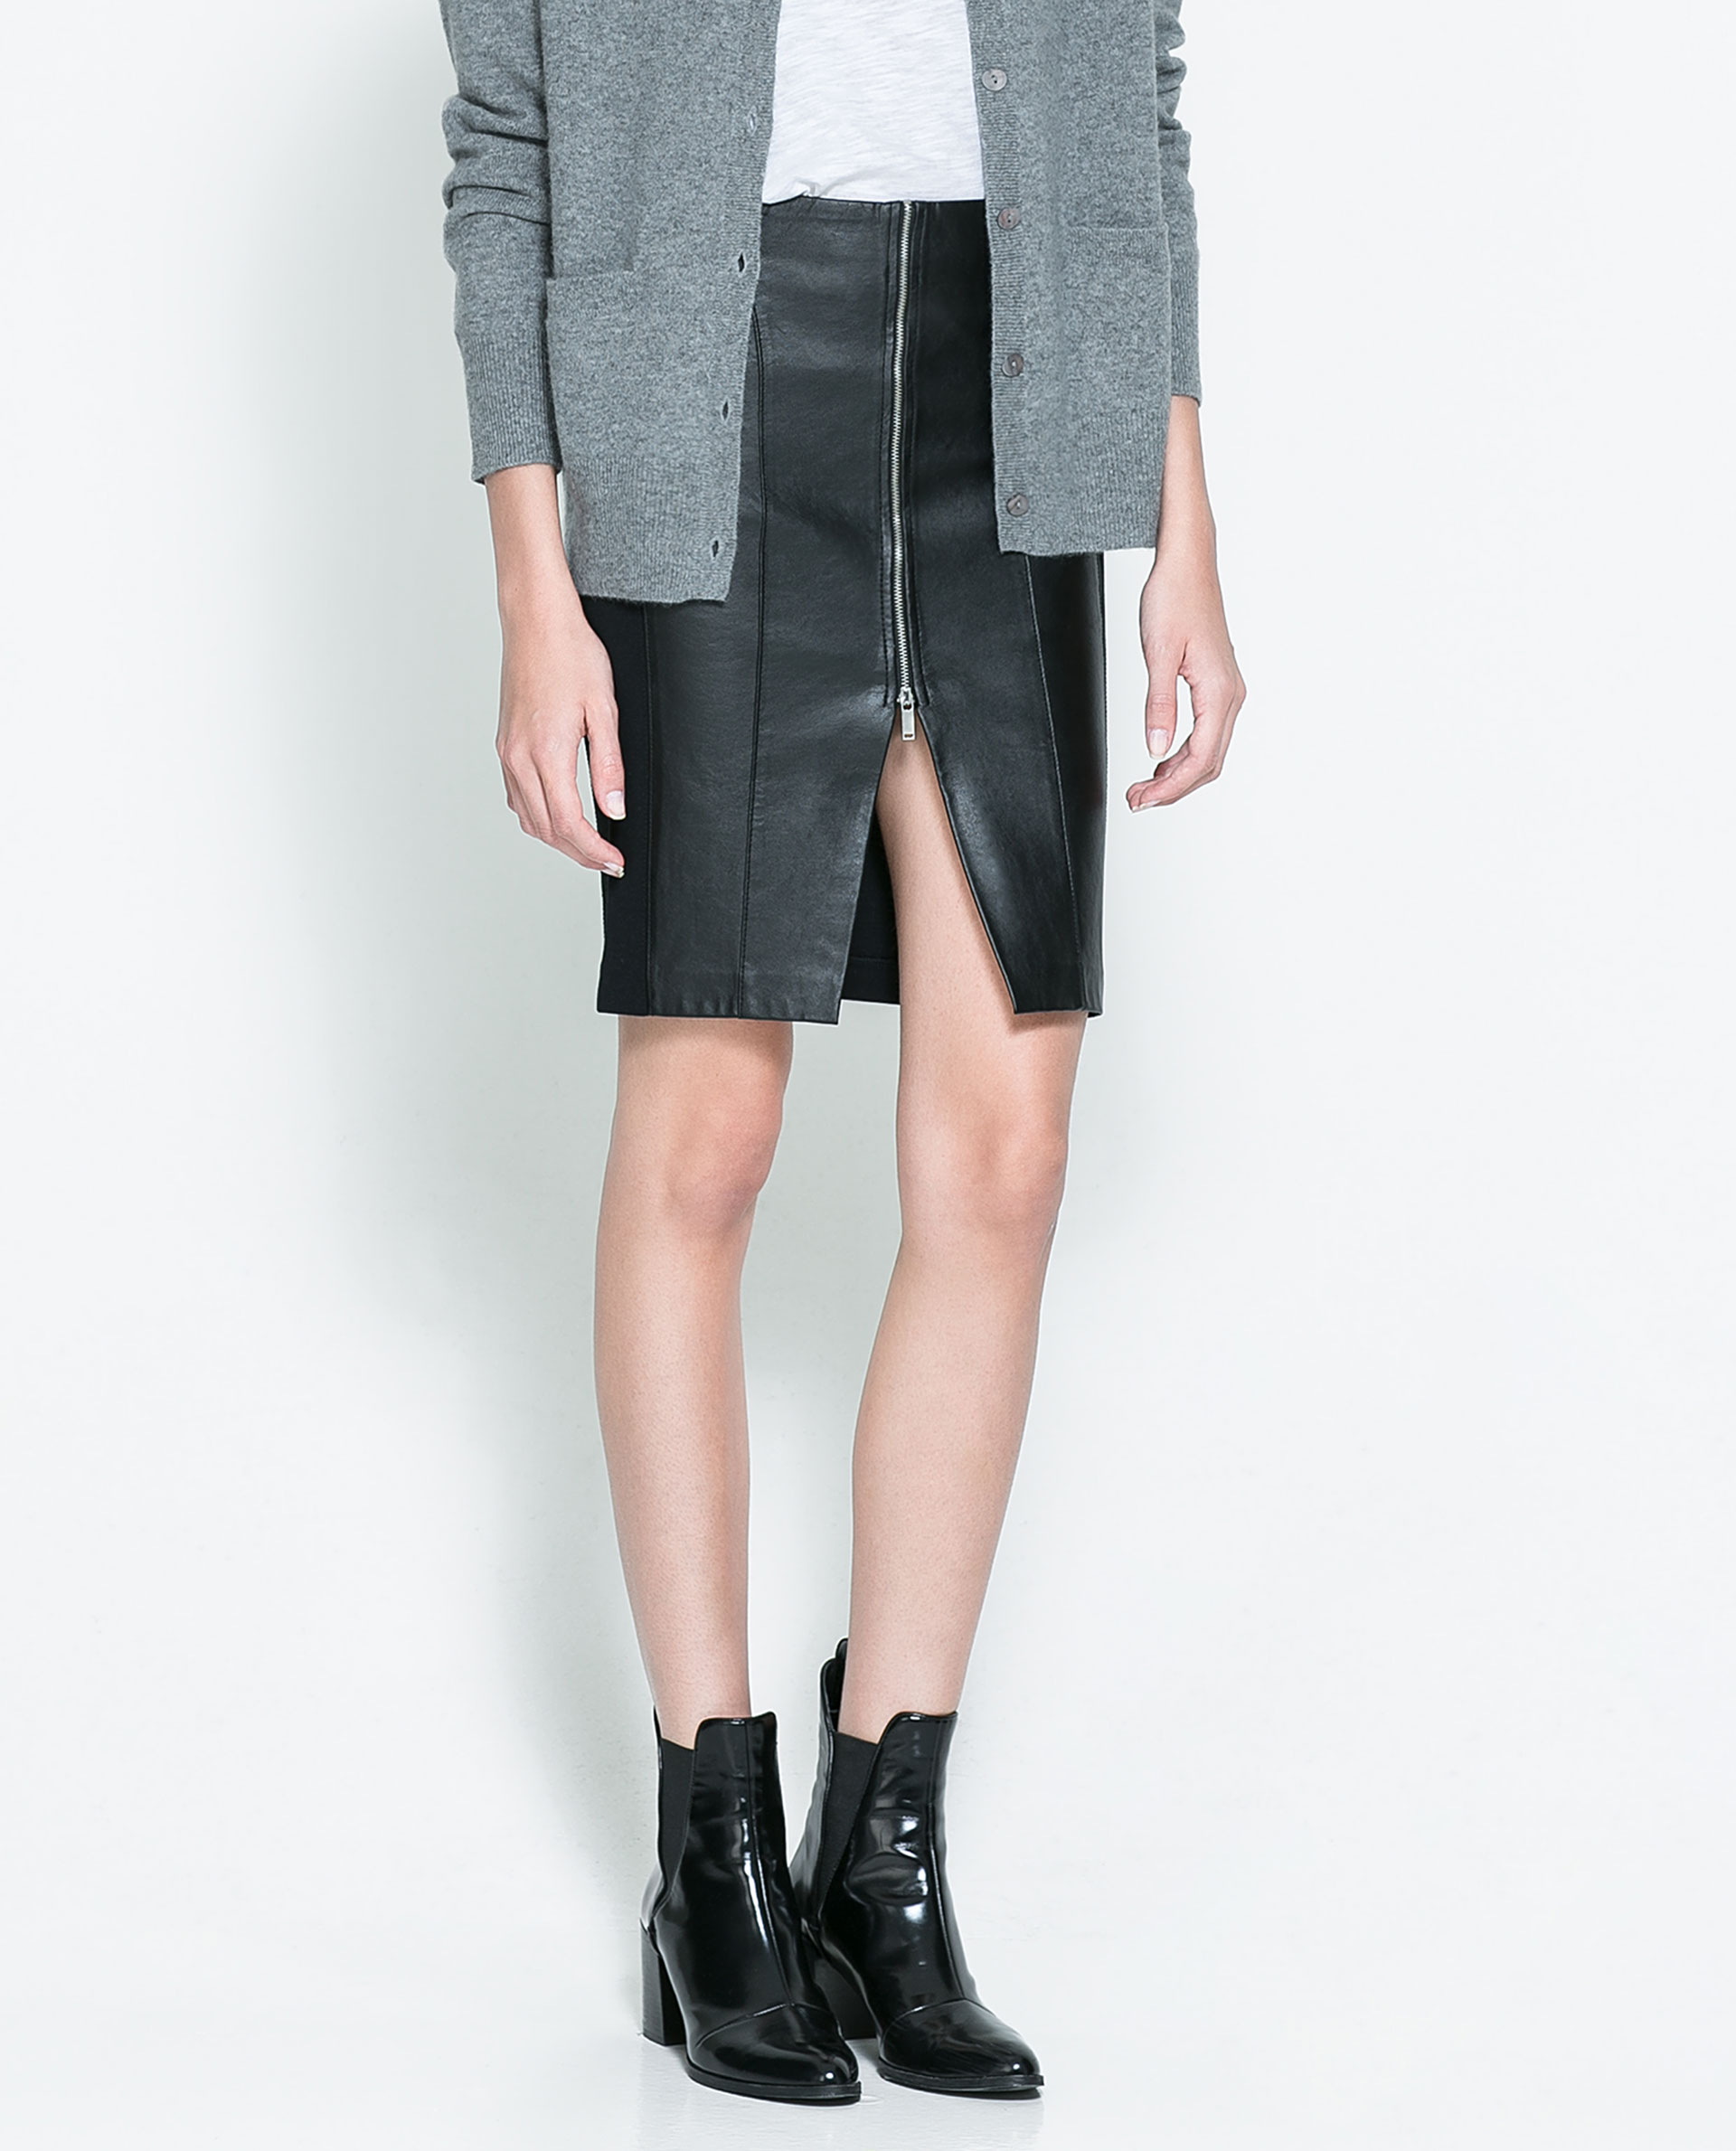 Zara Faux Leather Skirt with Zip in Black | Lyst